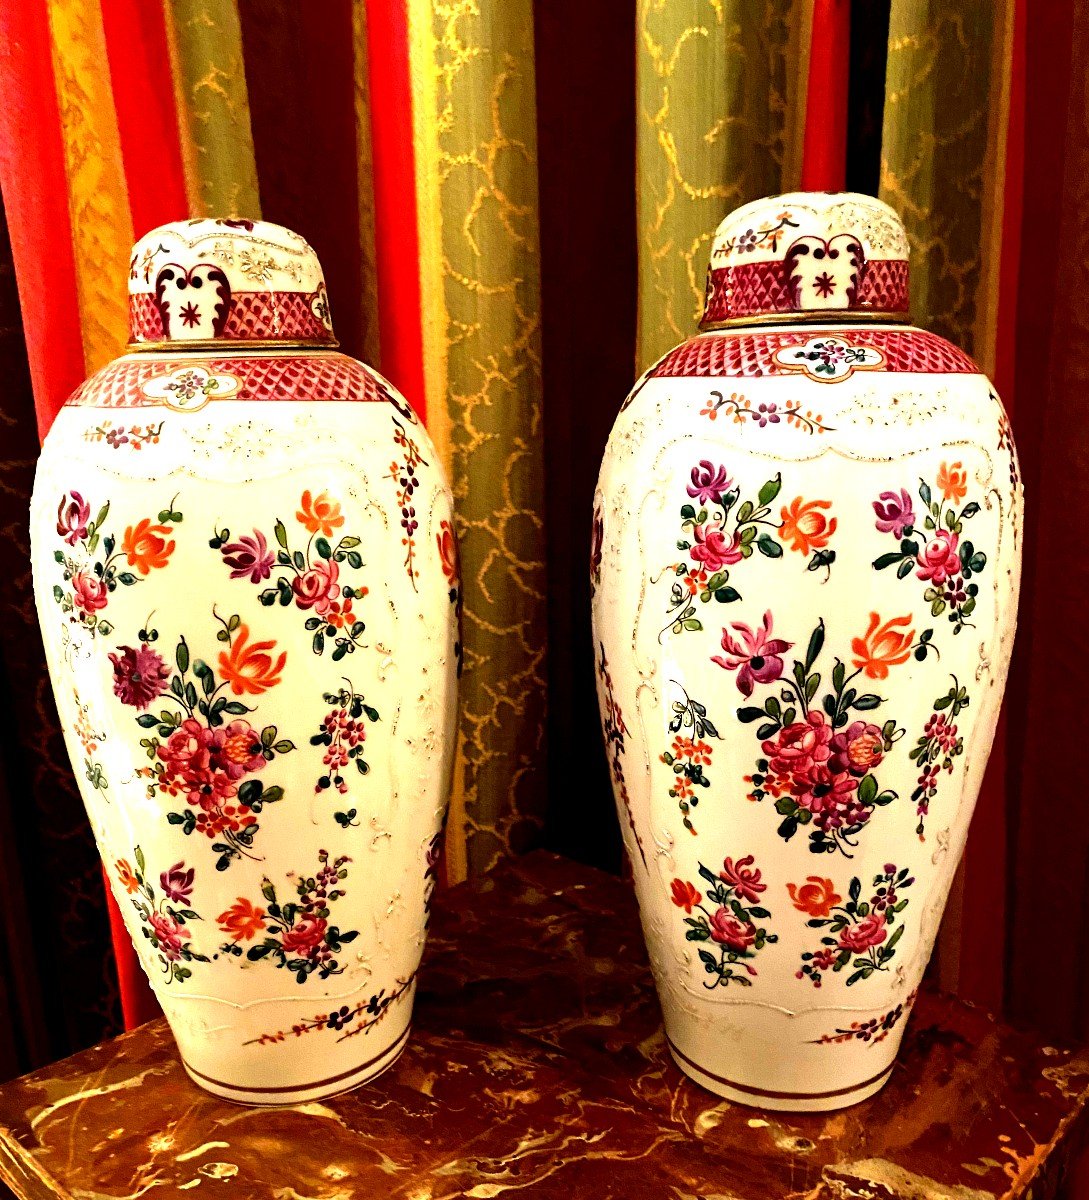 Very Beautiful Pair Of Covered Pots In The Chinese Way Mid-nineteenth Century By Jacob Petit Paris